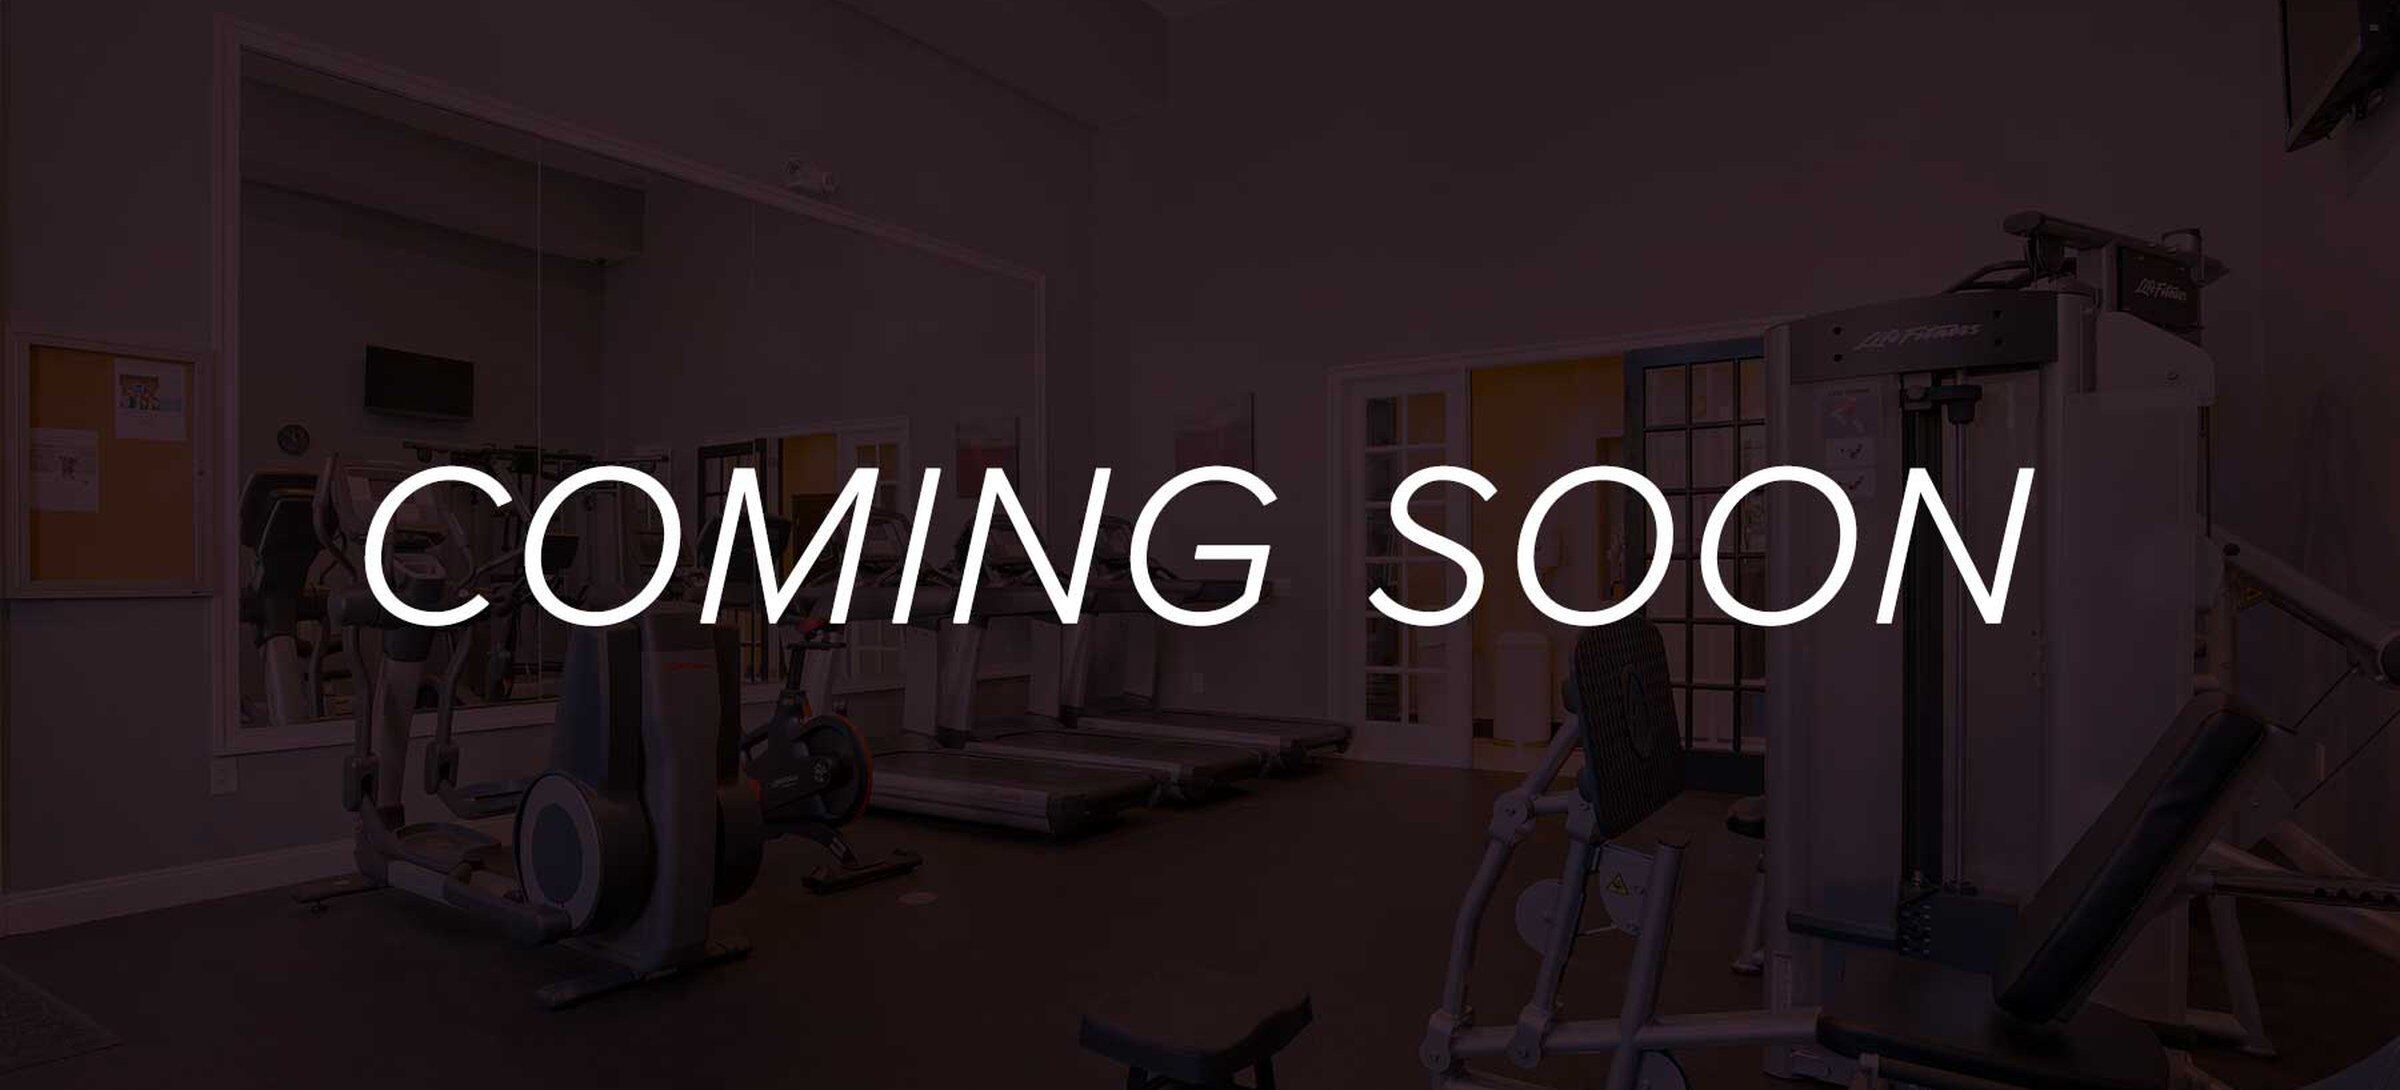 Coming soon - Renovated fitness center with new flooring